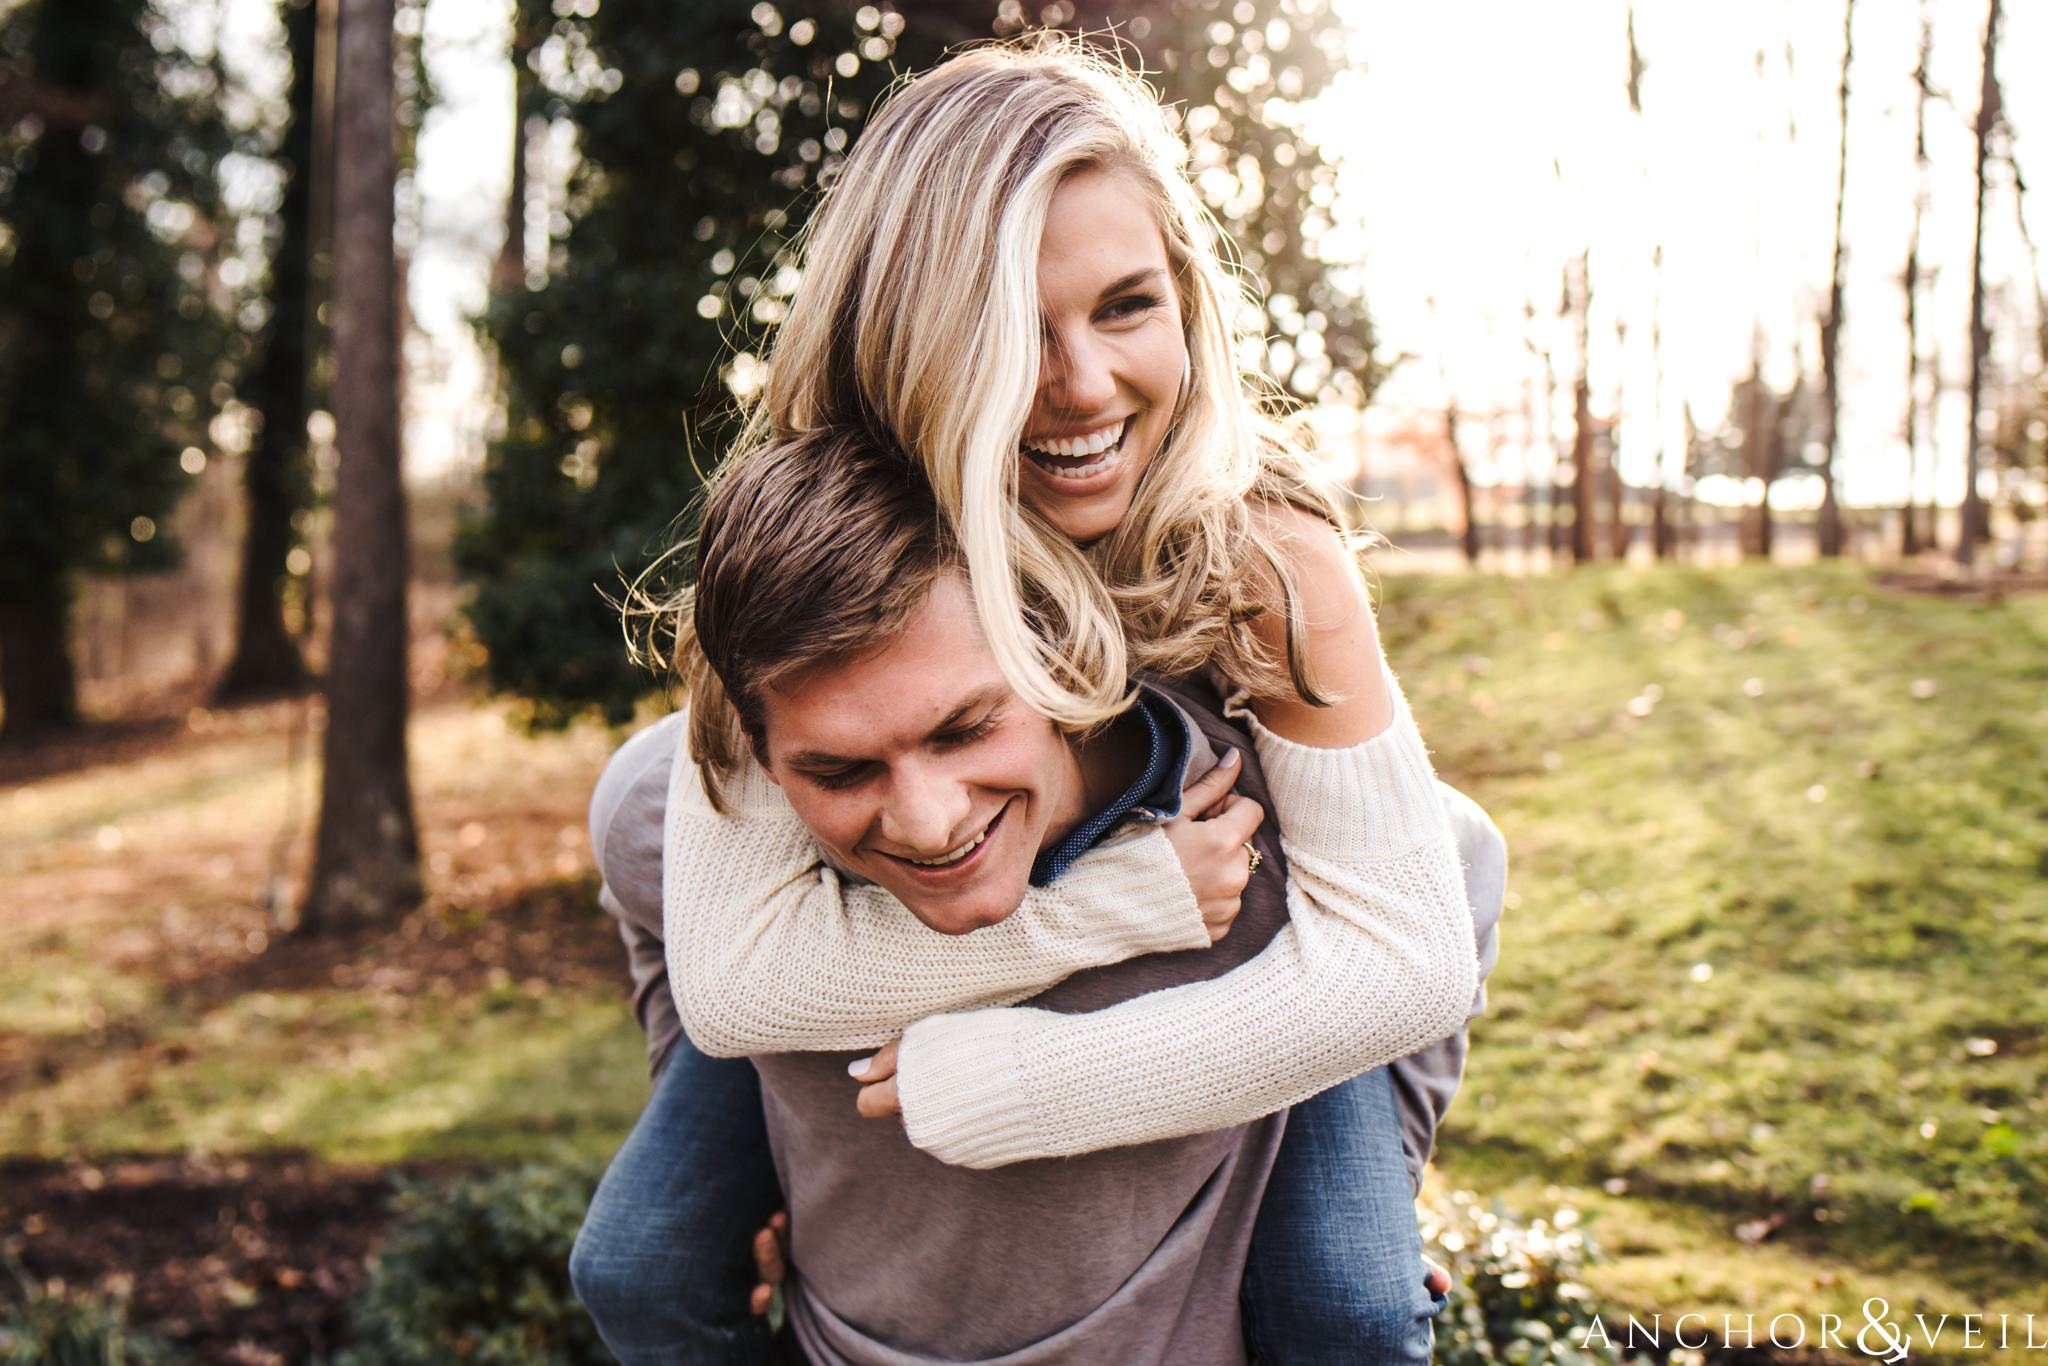 Piggy back Rides during their Dale Earnhardt Inc Engagement Session Mooresville